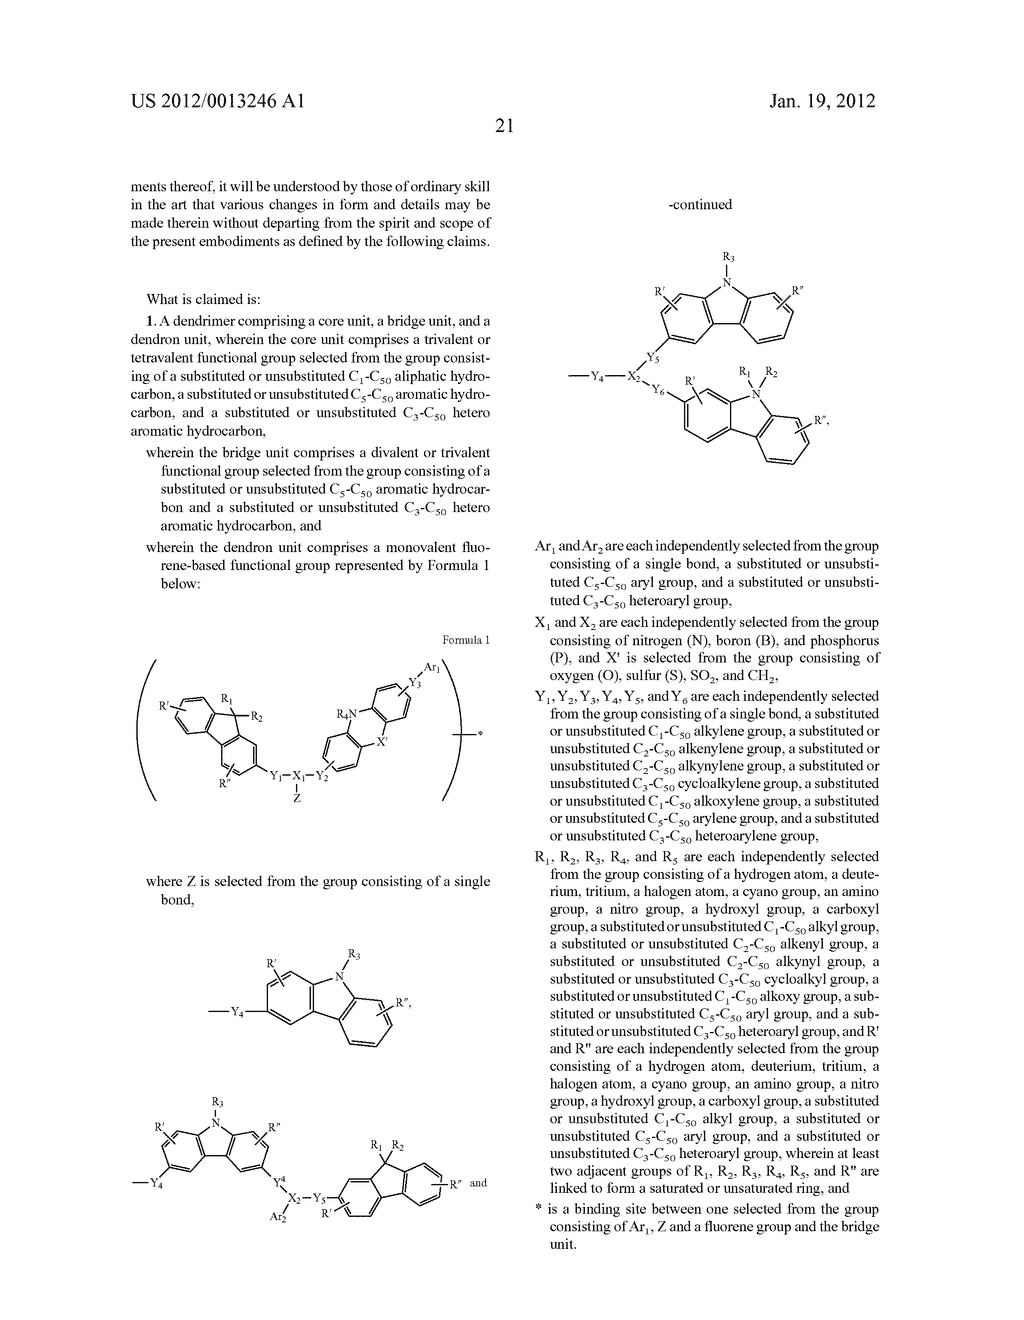 DENDRIMER AND ORGANIC LIGHT-EMITTING DEVICE USING THE SAME - diagram, schematic, and image 23